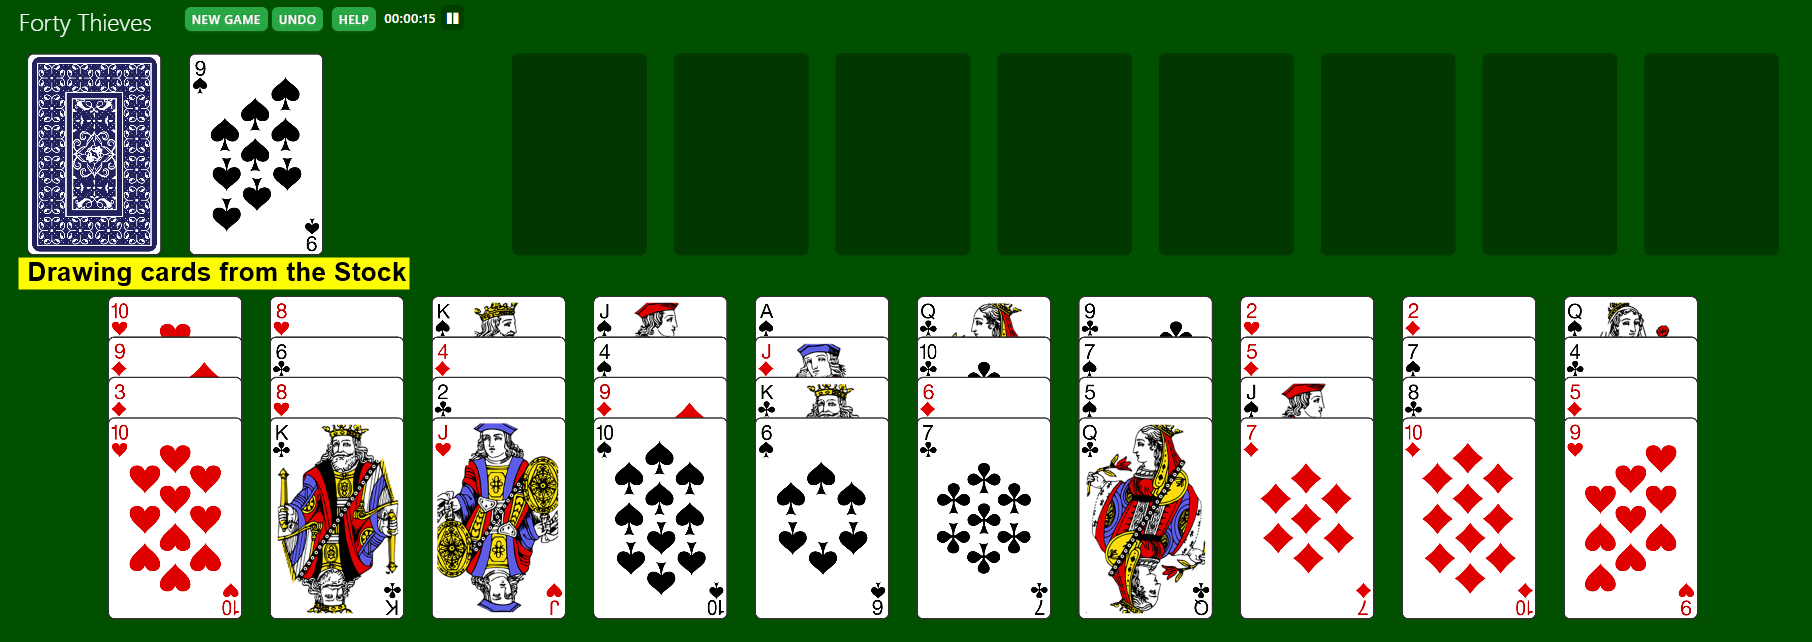 40 thieves solitaire paradise